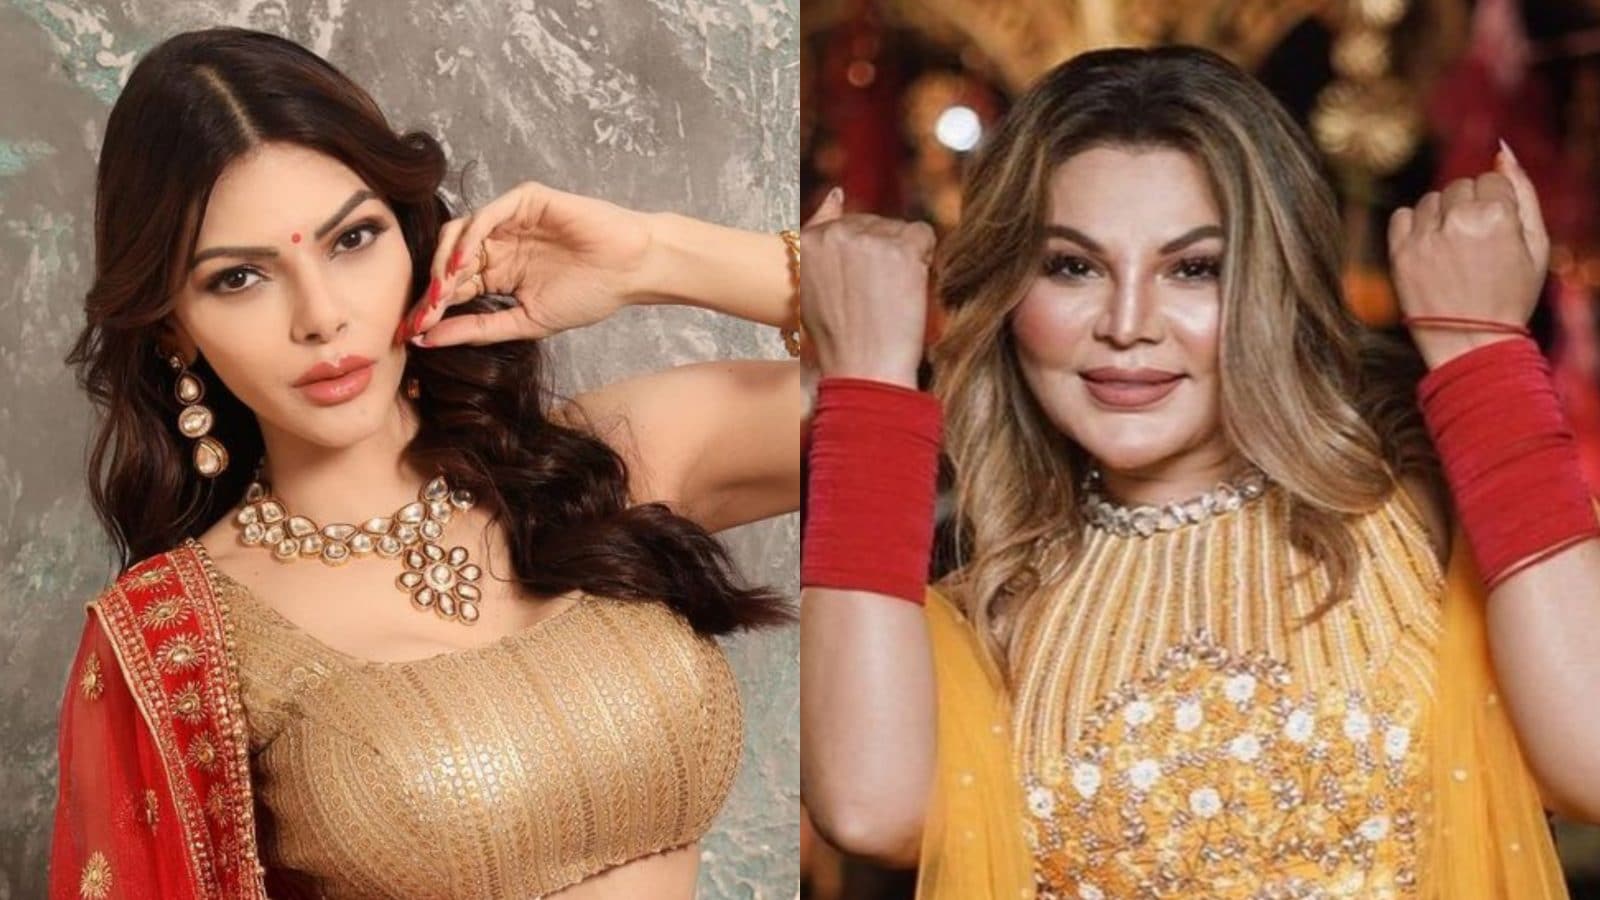 Rakhi Sawant Xnx - Sherlyn Chopra Asks Rakhi Sawant To Get Aside, Says 'My Fight Is Not With  Her' - News18